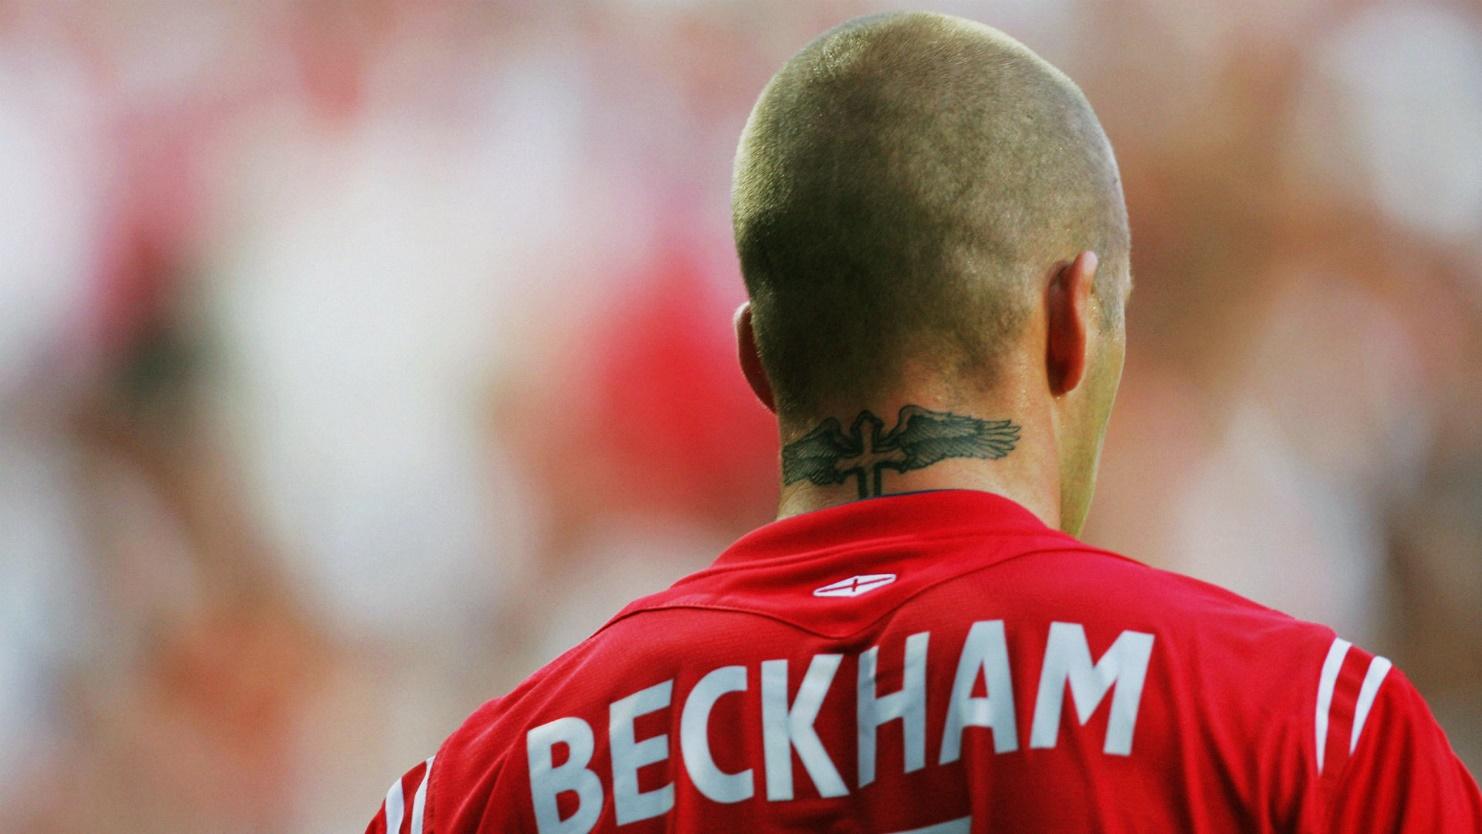 David Beckham's tattoos: Where are they and what do they mean? | Goal.com US